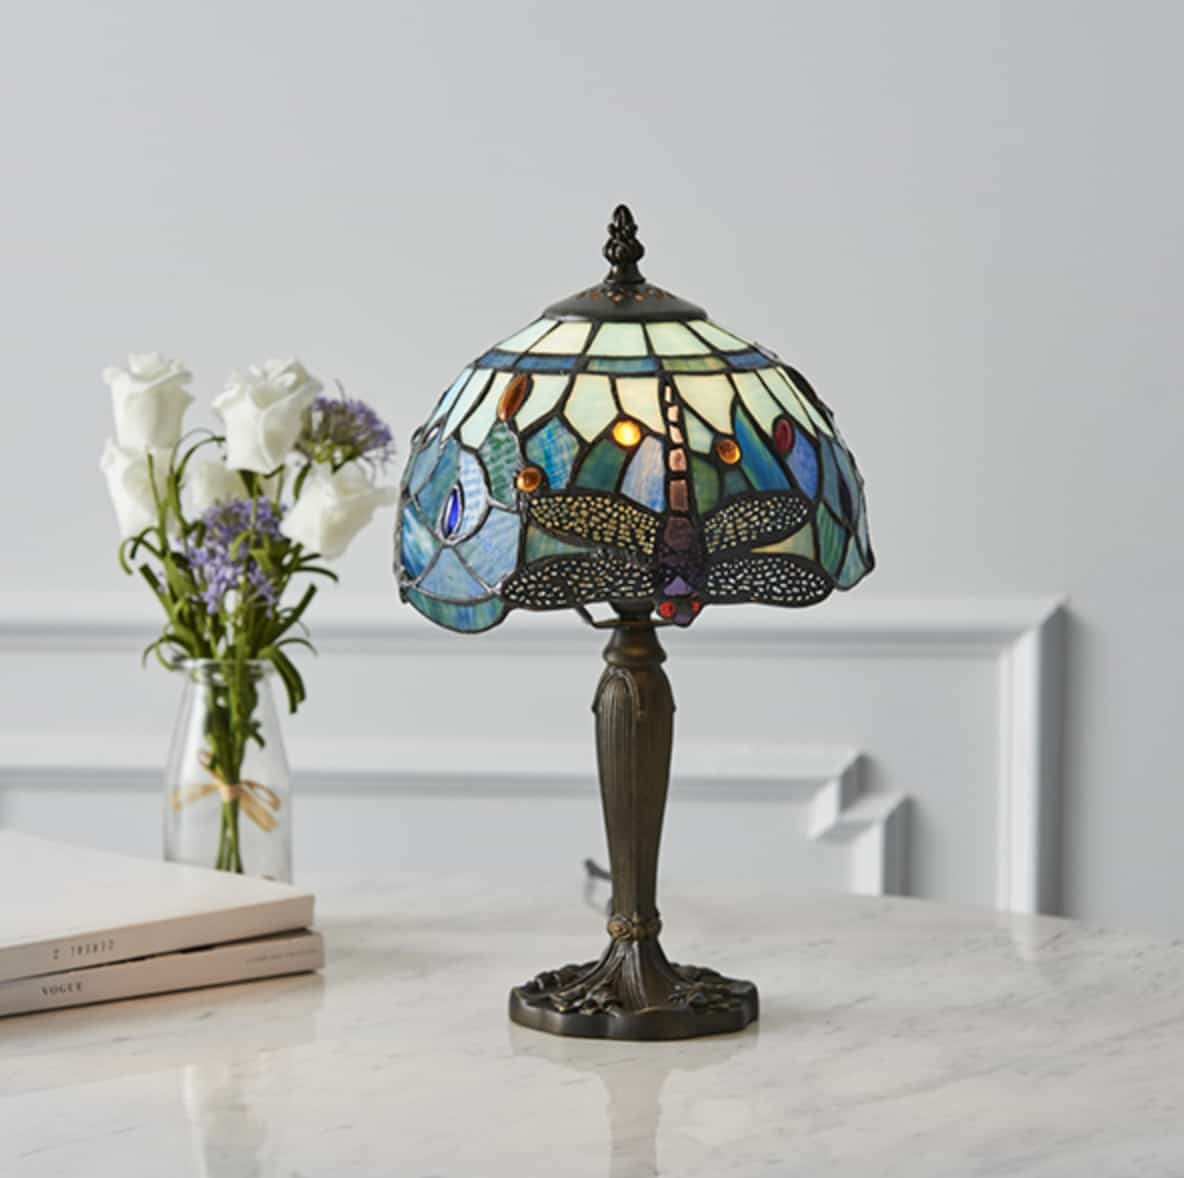 Tiffany Bedside Lamp with Dragonflies, Blue Color, 20cm